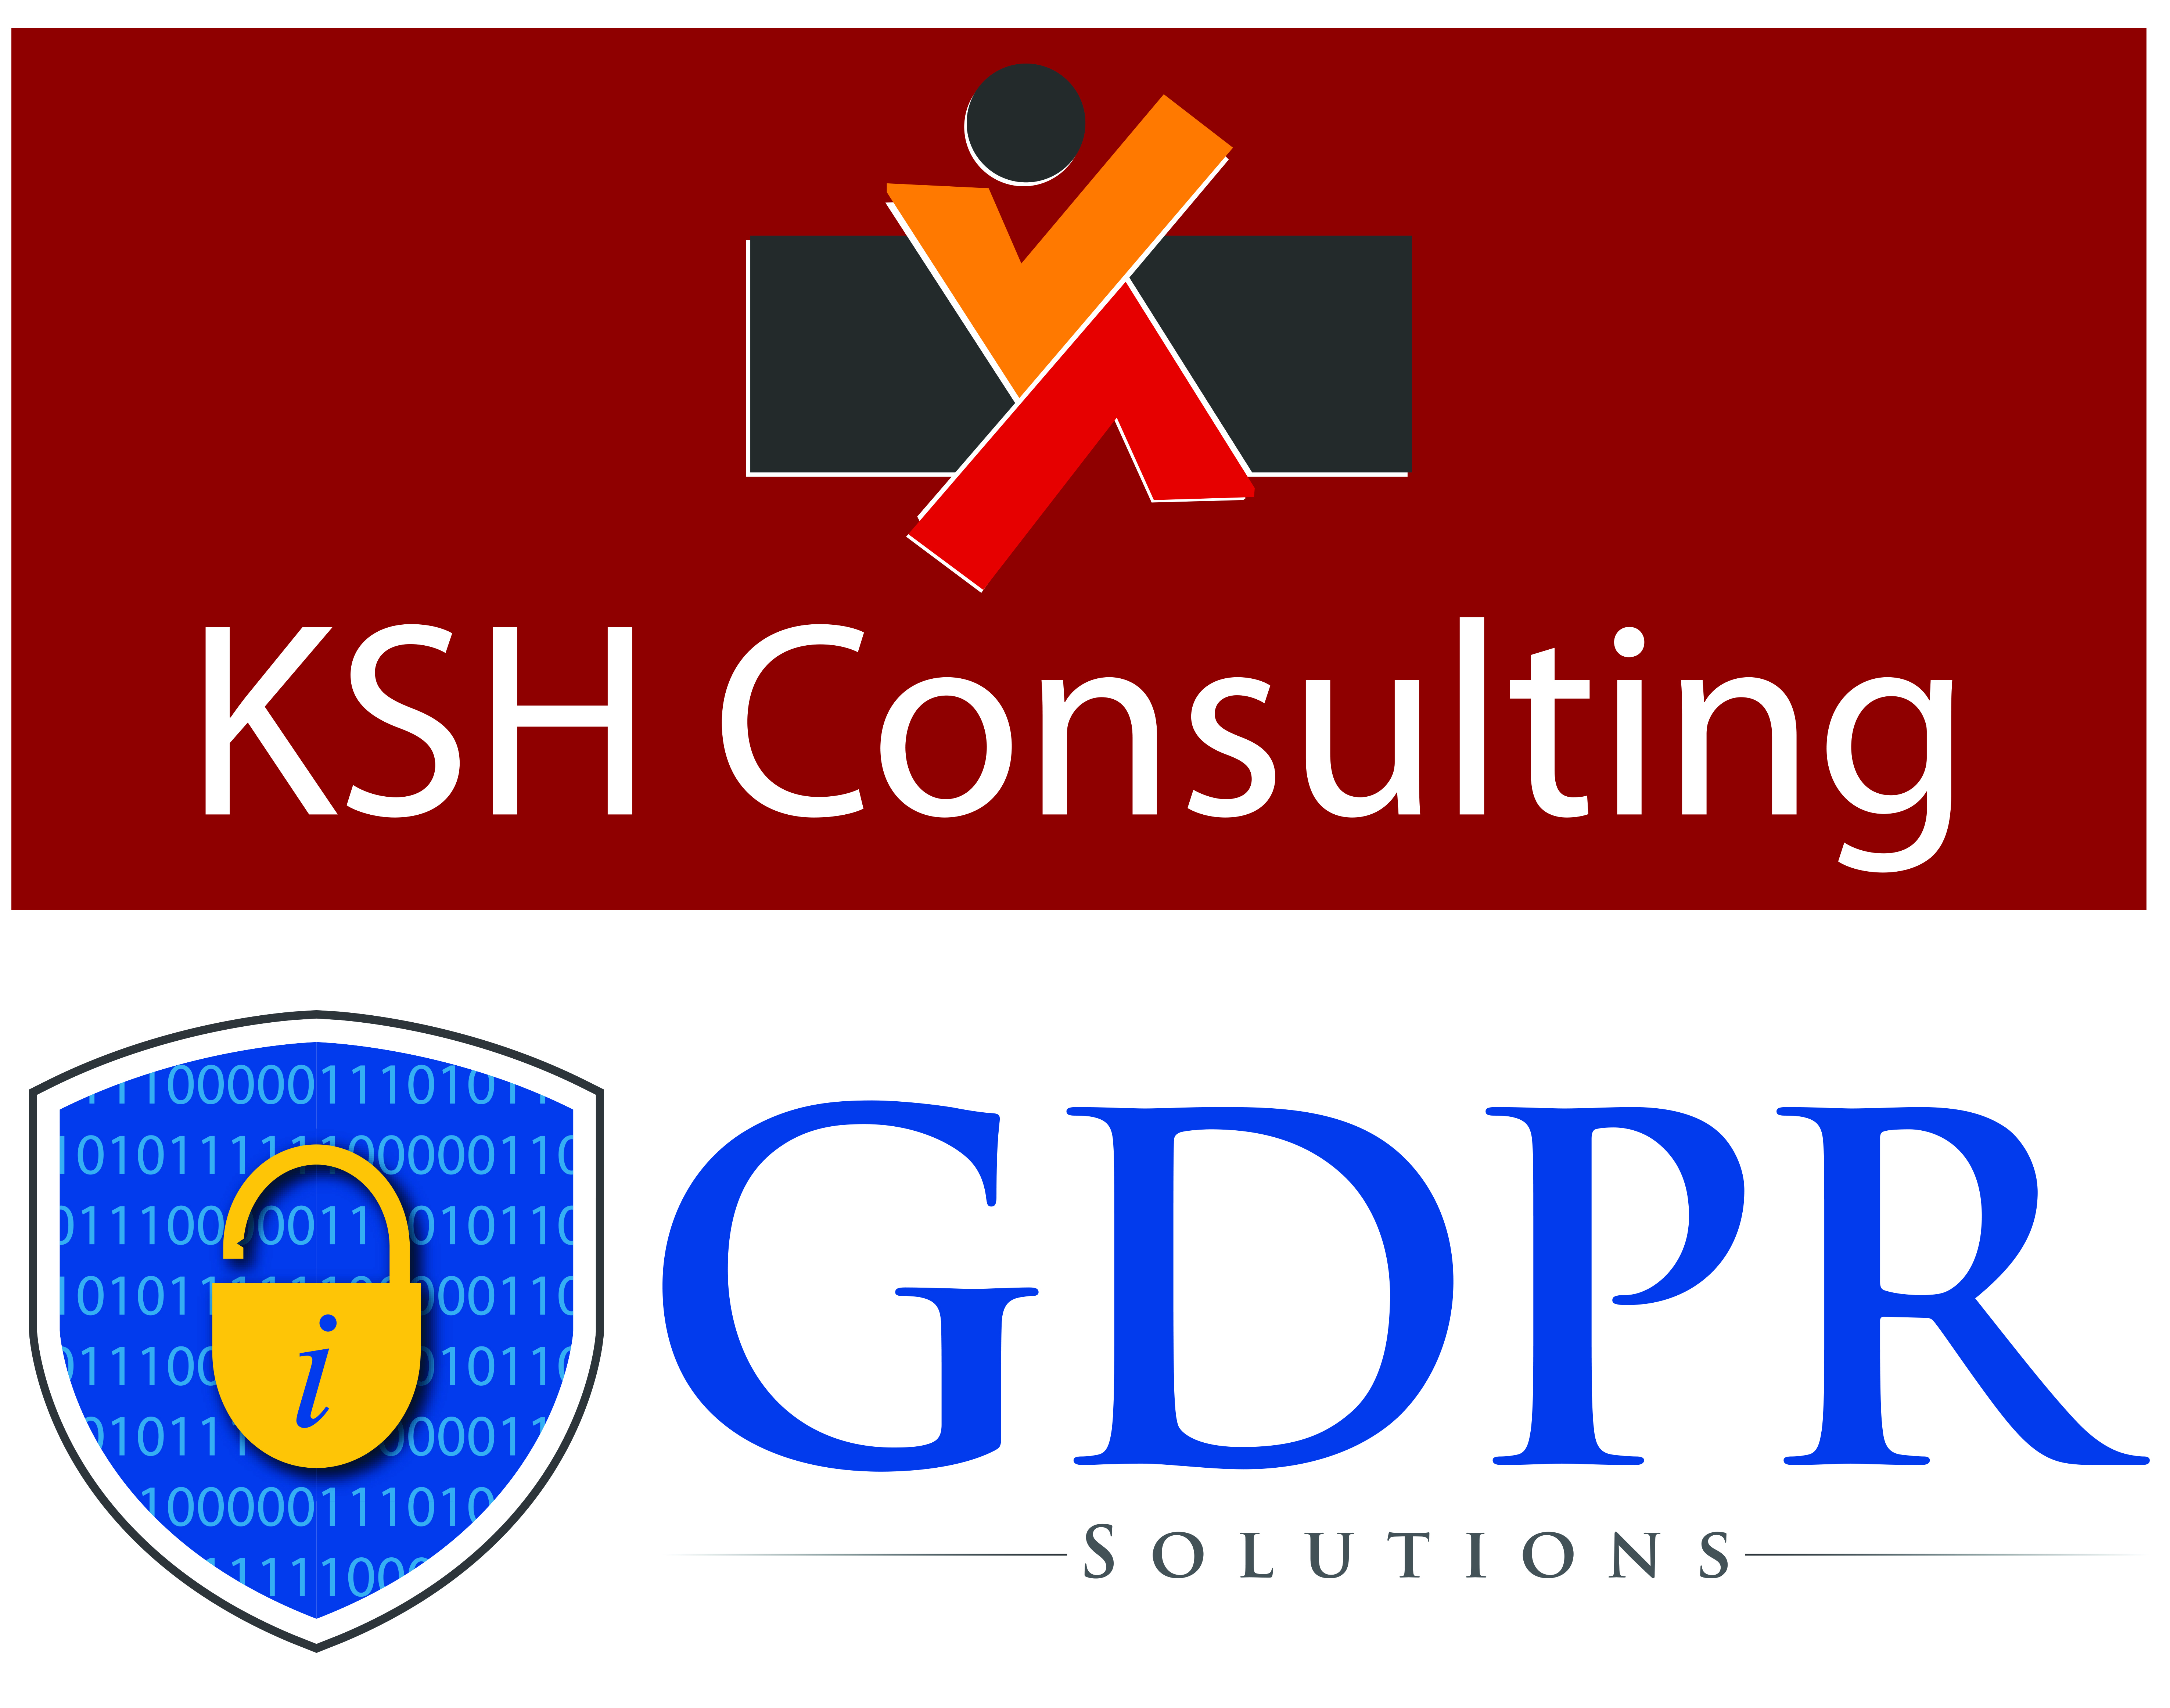 KSH Consulting